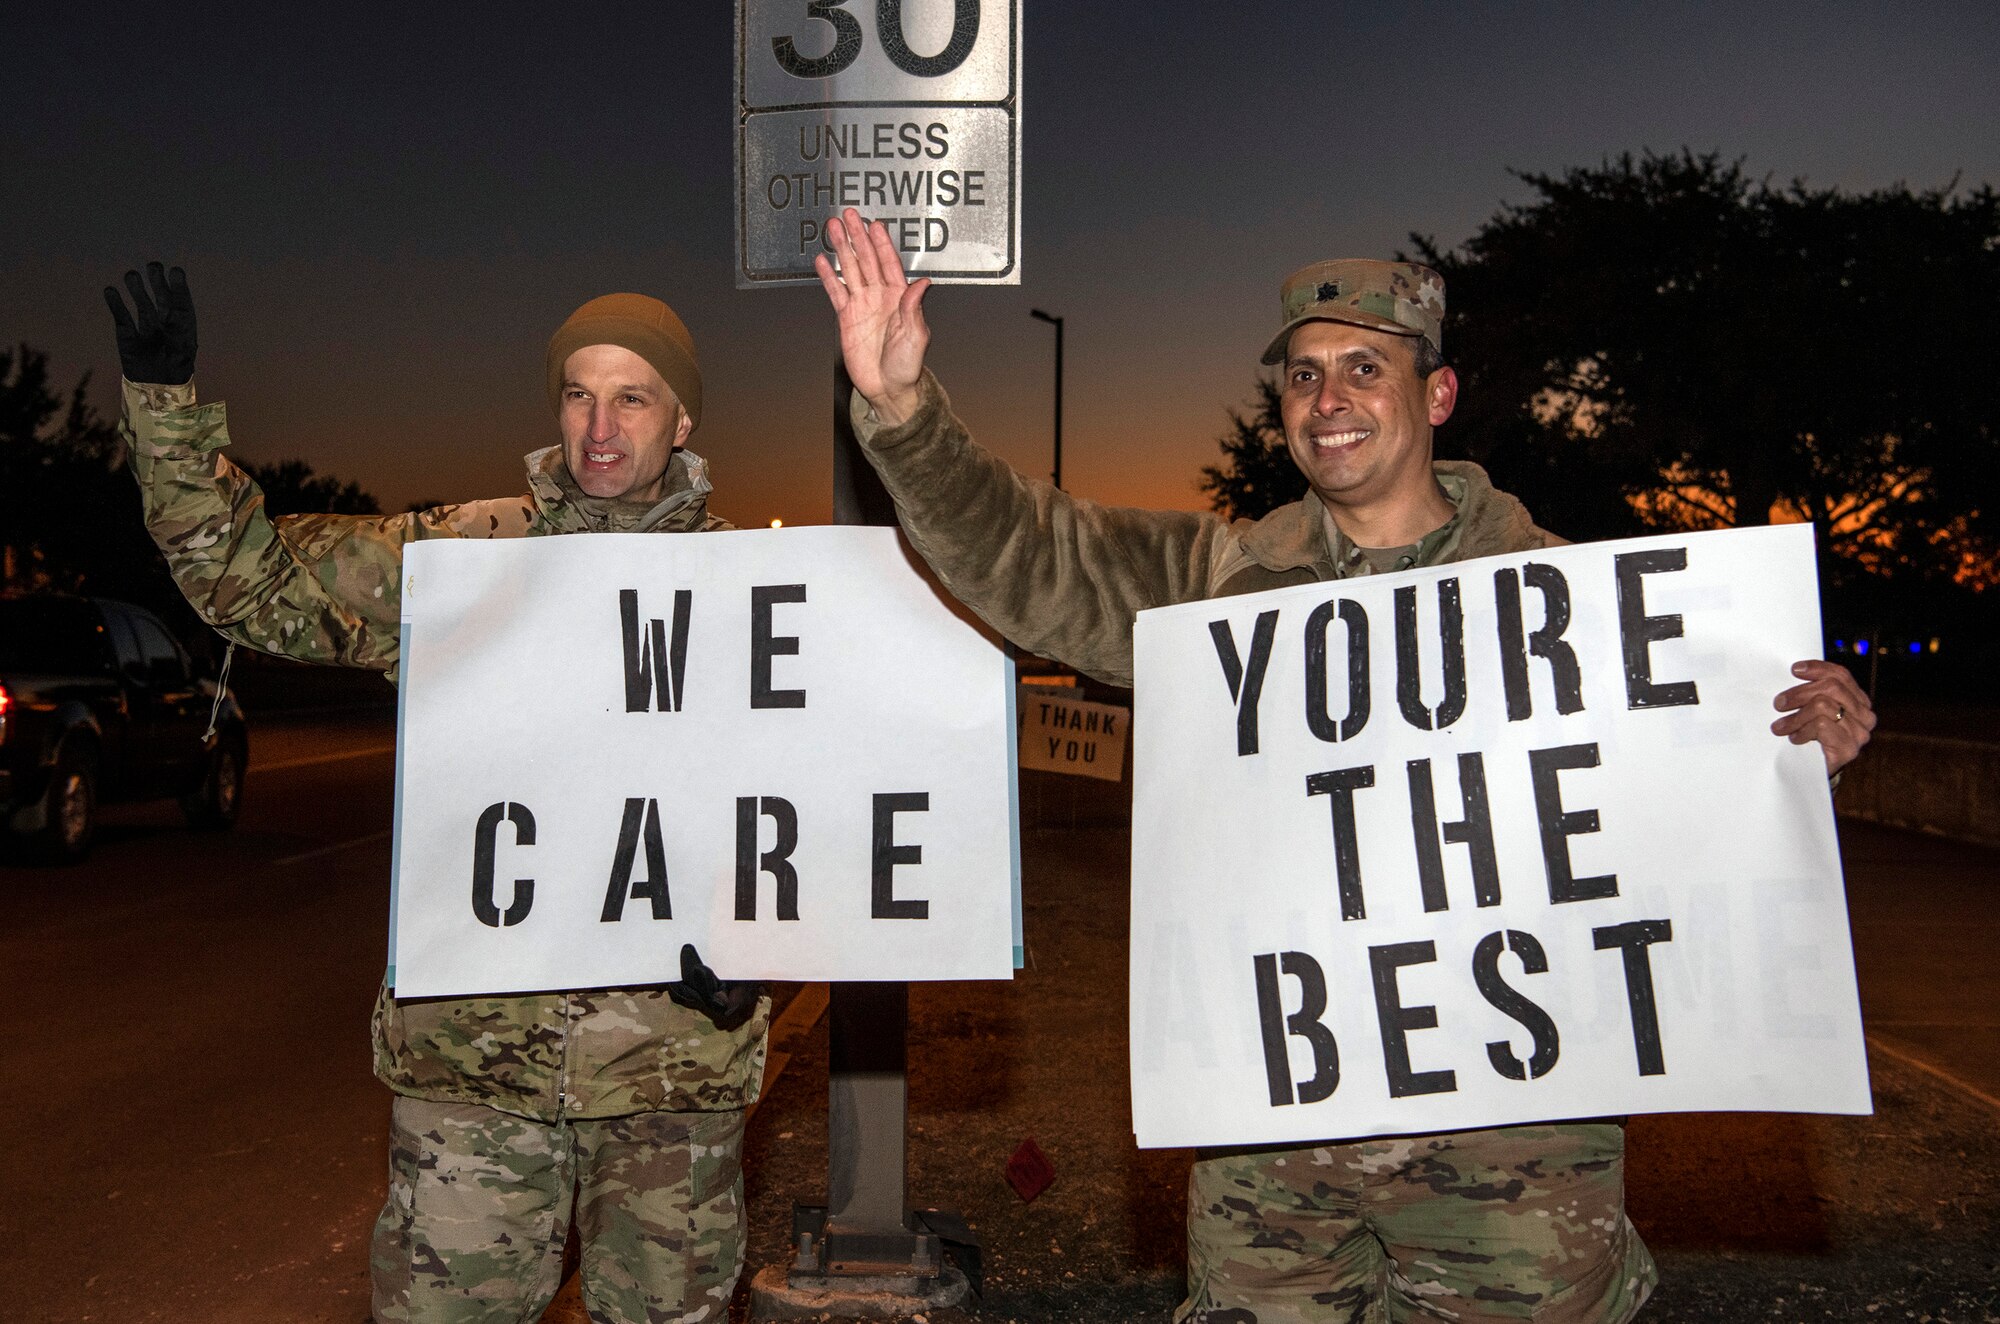 From left, Lt. Col. Scott Christensen, 331st Training Squadron commander, and Lt. Col. Raymundo Vann, 323rd Training Squadron commander, hold positive messages of support at a base gate during the morning inbound commute as part of their new initiative, “We Care,” at Joint Base San Antonio-Lackland, Texas, Dec. 18, 2019. The initiative involved 37th Training Wing military and civilian members spending the morning at various gates letting each person know that they stand together in support of those struggling with depression and thoughts of suicide by holding a positive message of support and handing out over 400 candy canes. If you are struggling with thoughts of suicide, please go directly to the Mental Health Clinic or to your closest Emergency Room. You can also reach the National Suicide Prevention Lifeline at 1-800-273-8255.